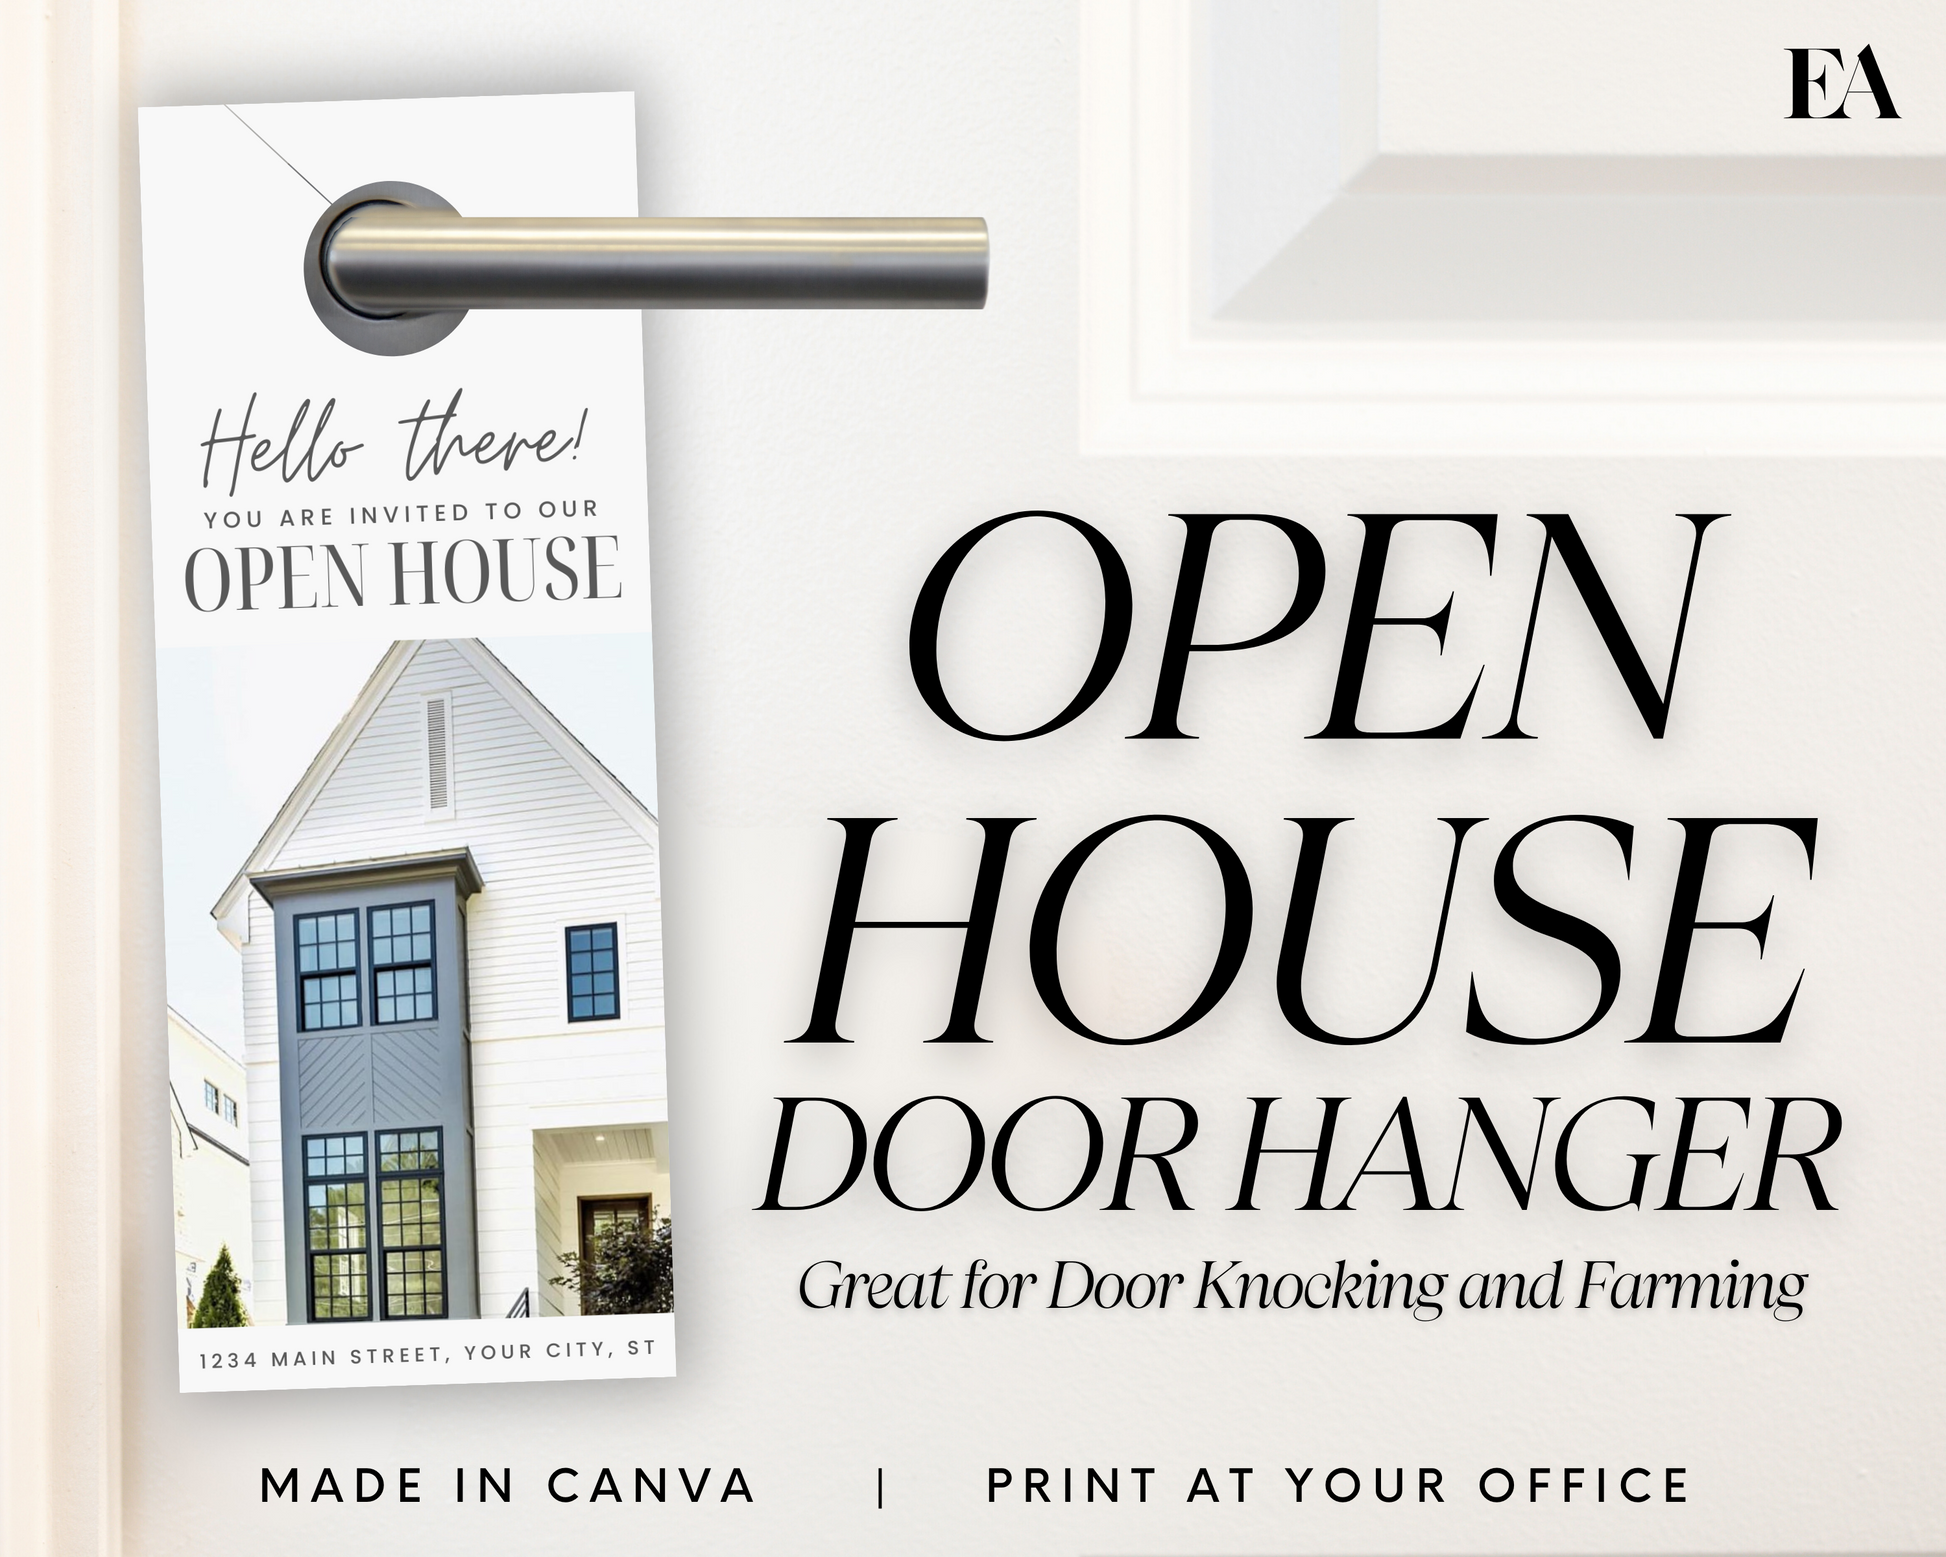 Open House Door Hanger For Real Estate, Real Estate Open House Flyer Template, Realtor Door Knocking, Real Estate Farming Postcard, Door Tag for Open House